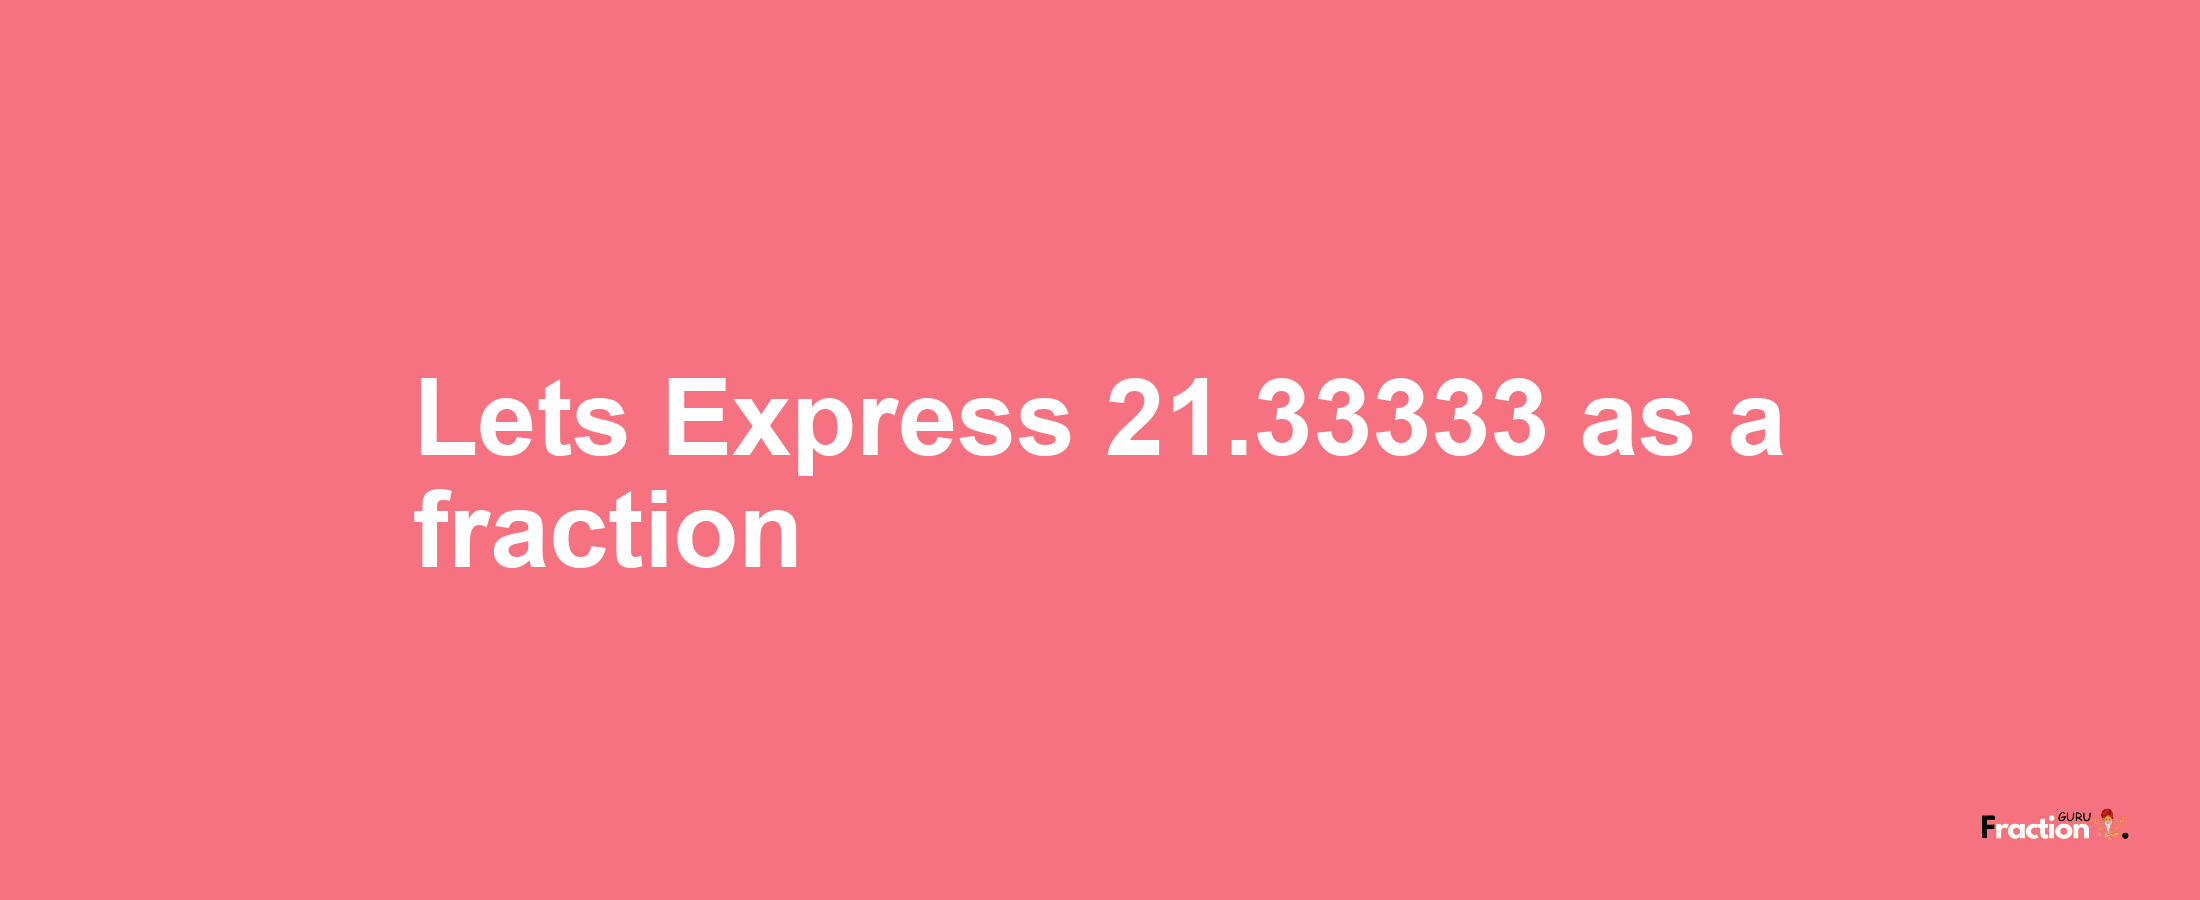 Lets Express 21.33333 as afraction